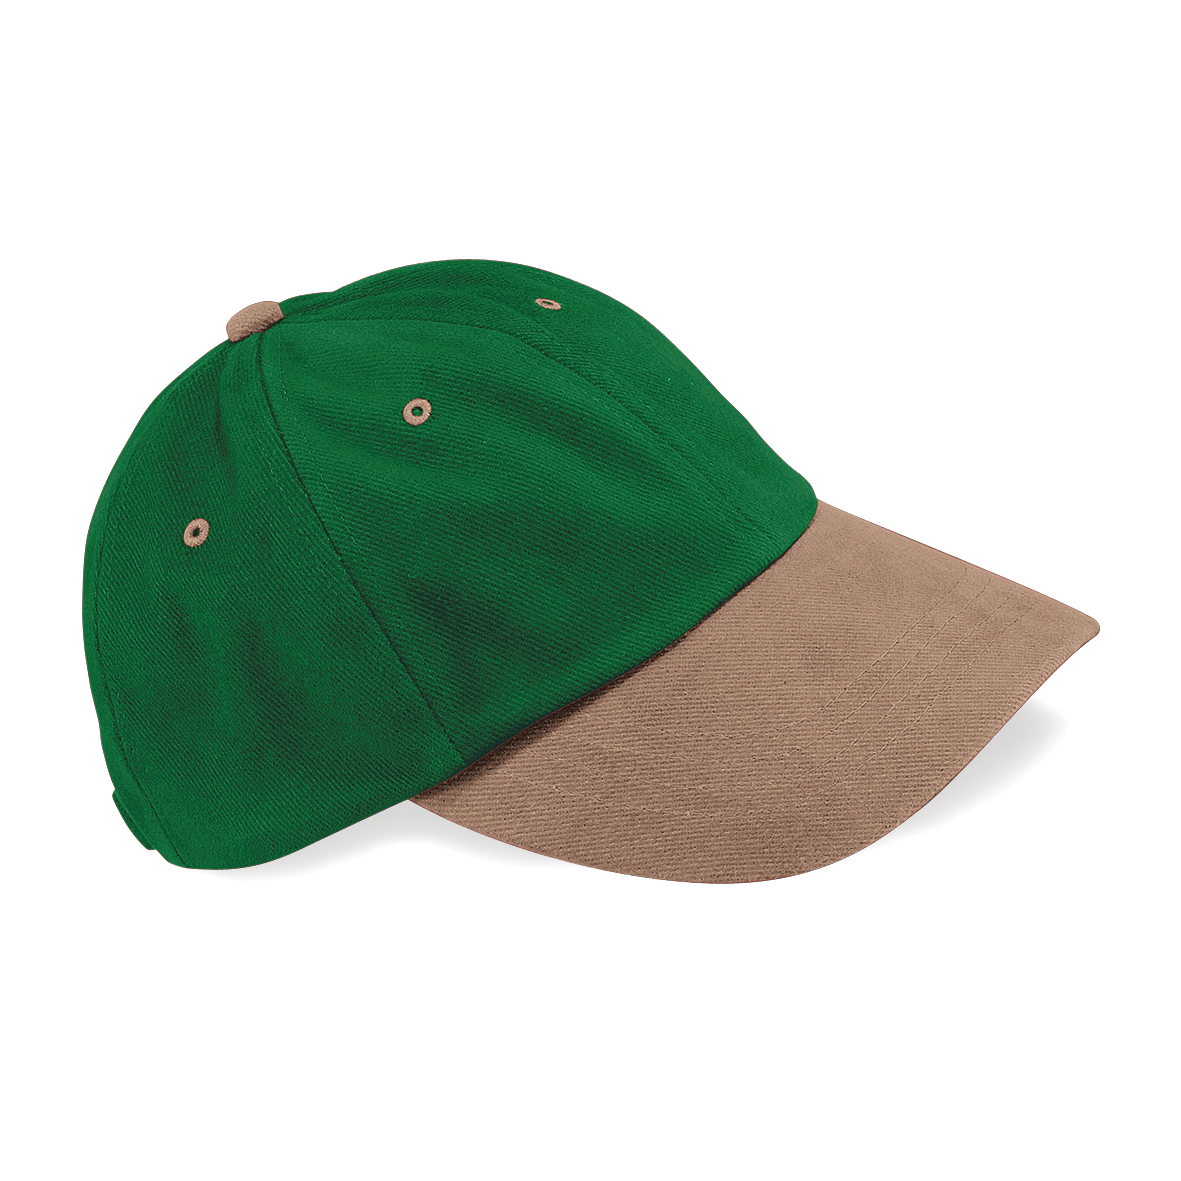 Low Profile Heavy Brushed Cotton Cap in green with brown visor, eyelets and button